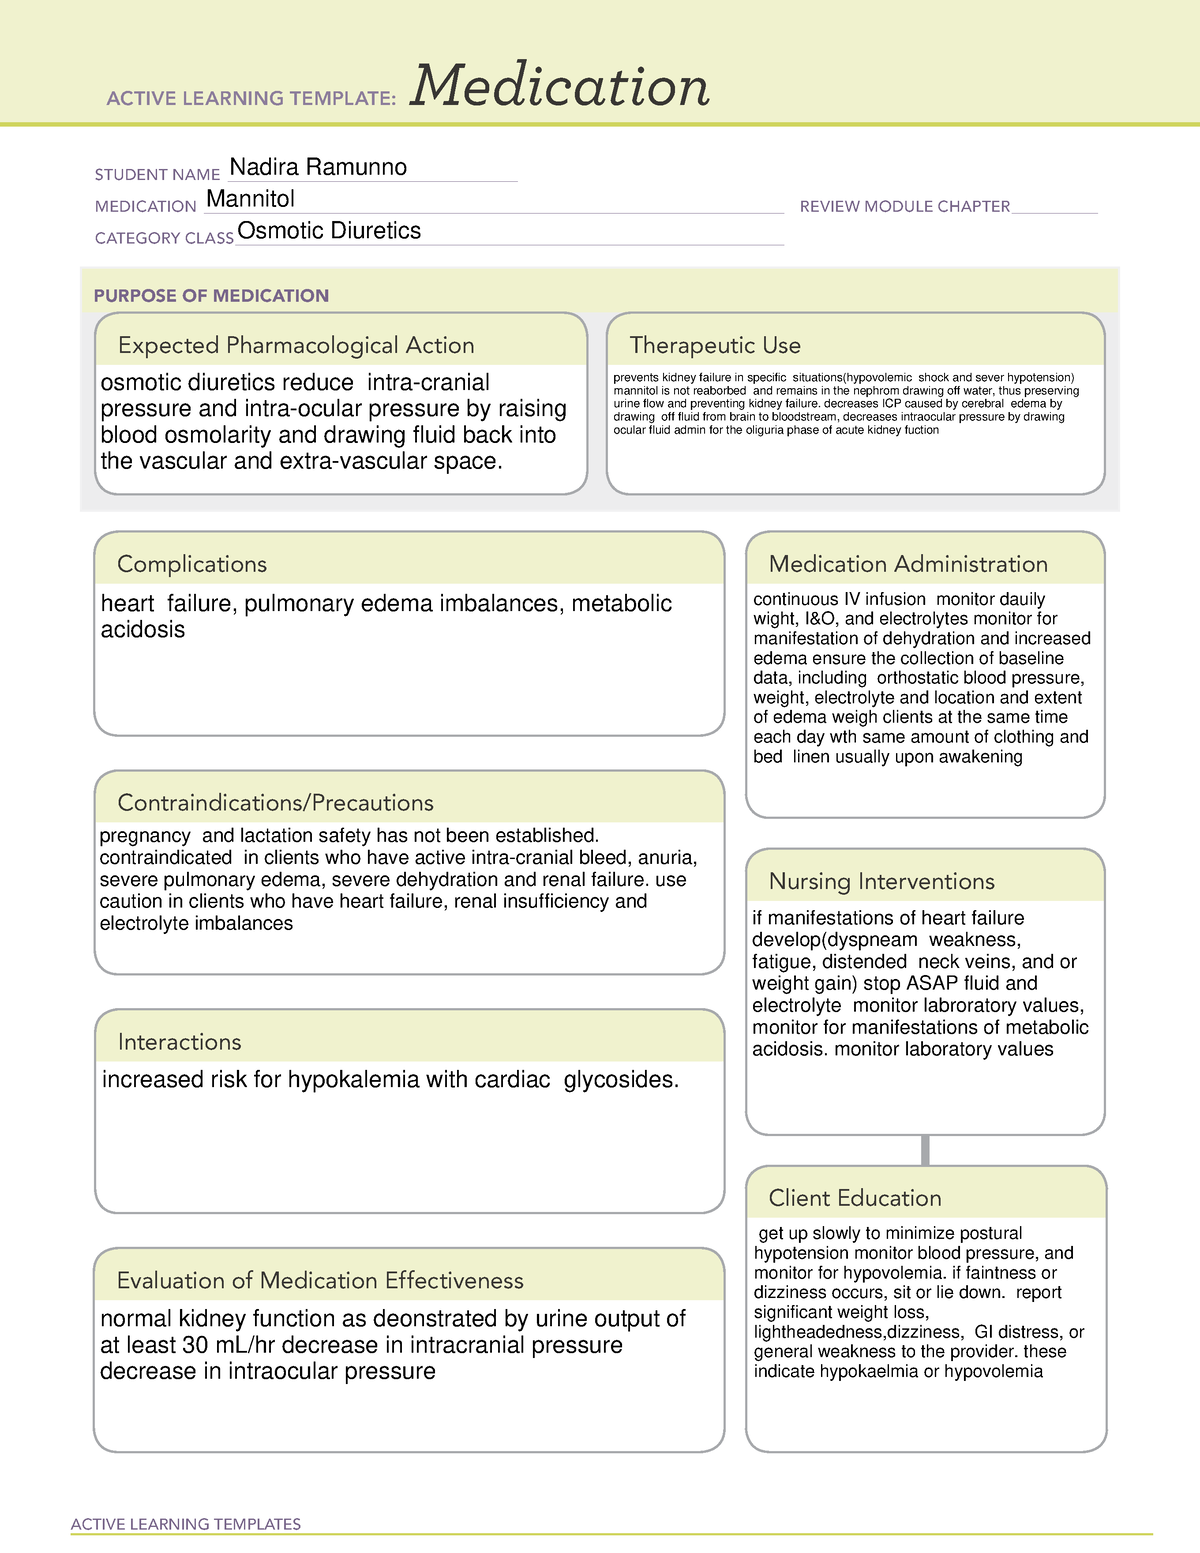 mannitol-medications-teach-of-uses-side-effects-and-interventions-active-learning-templates